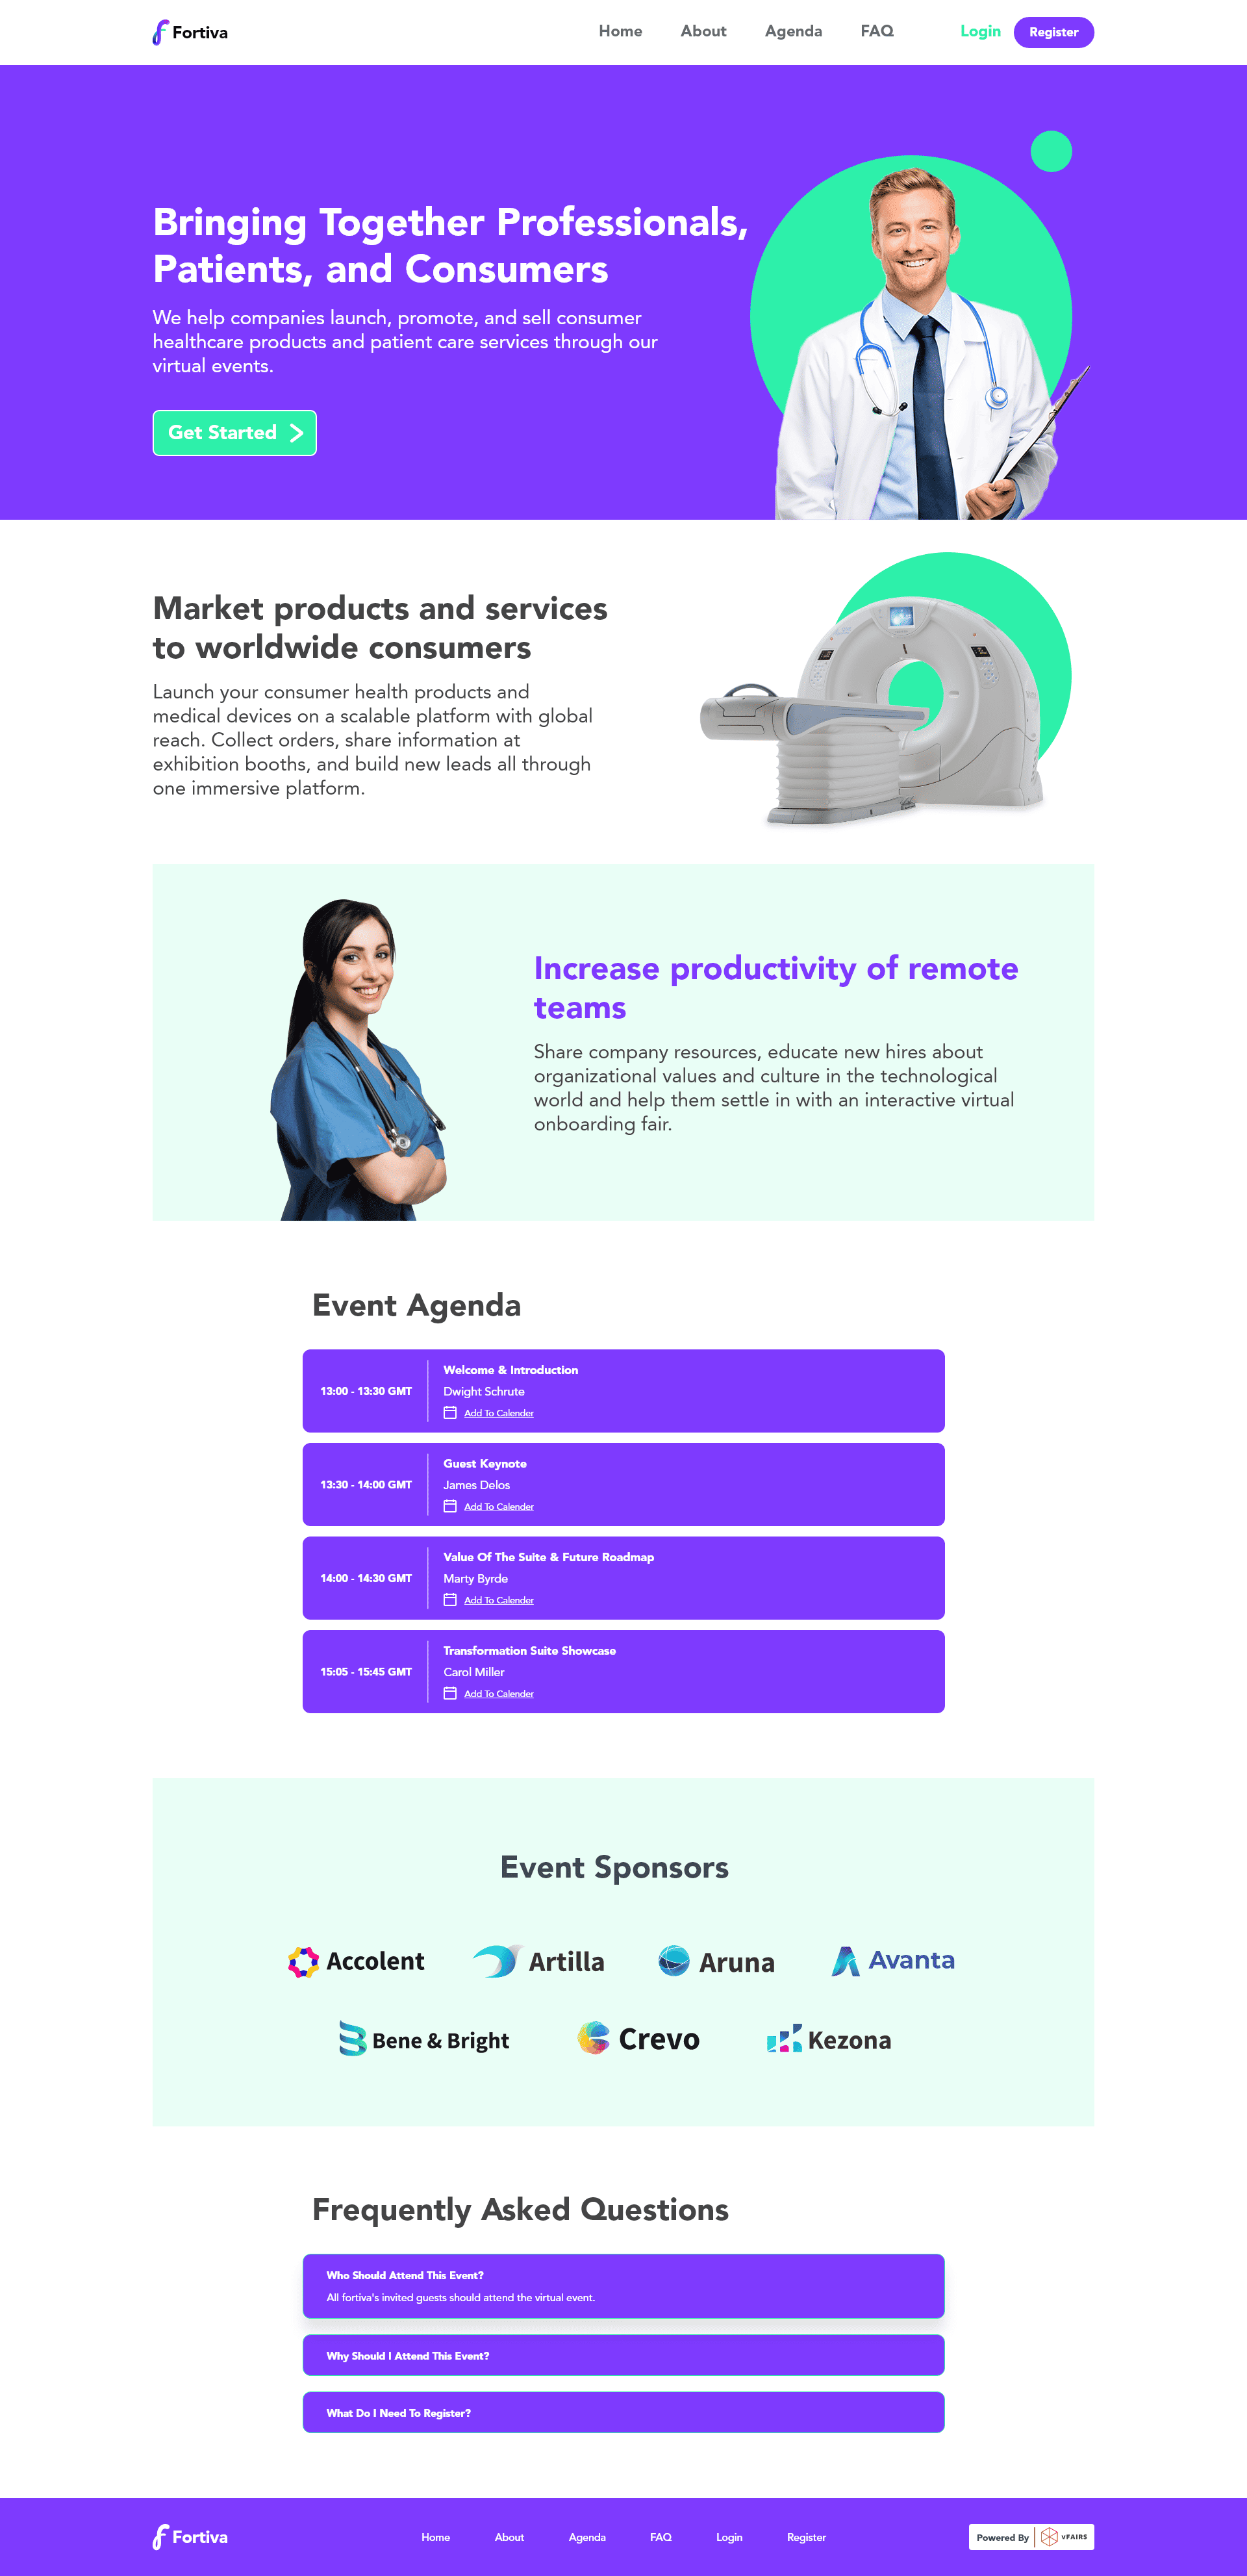 A sample for how you can design your event website with sponsors, speakers, event information, and agenda.